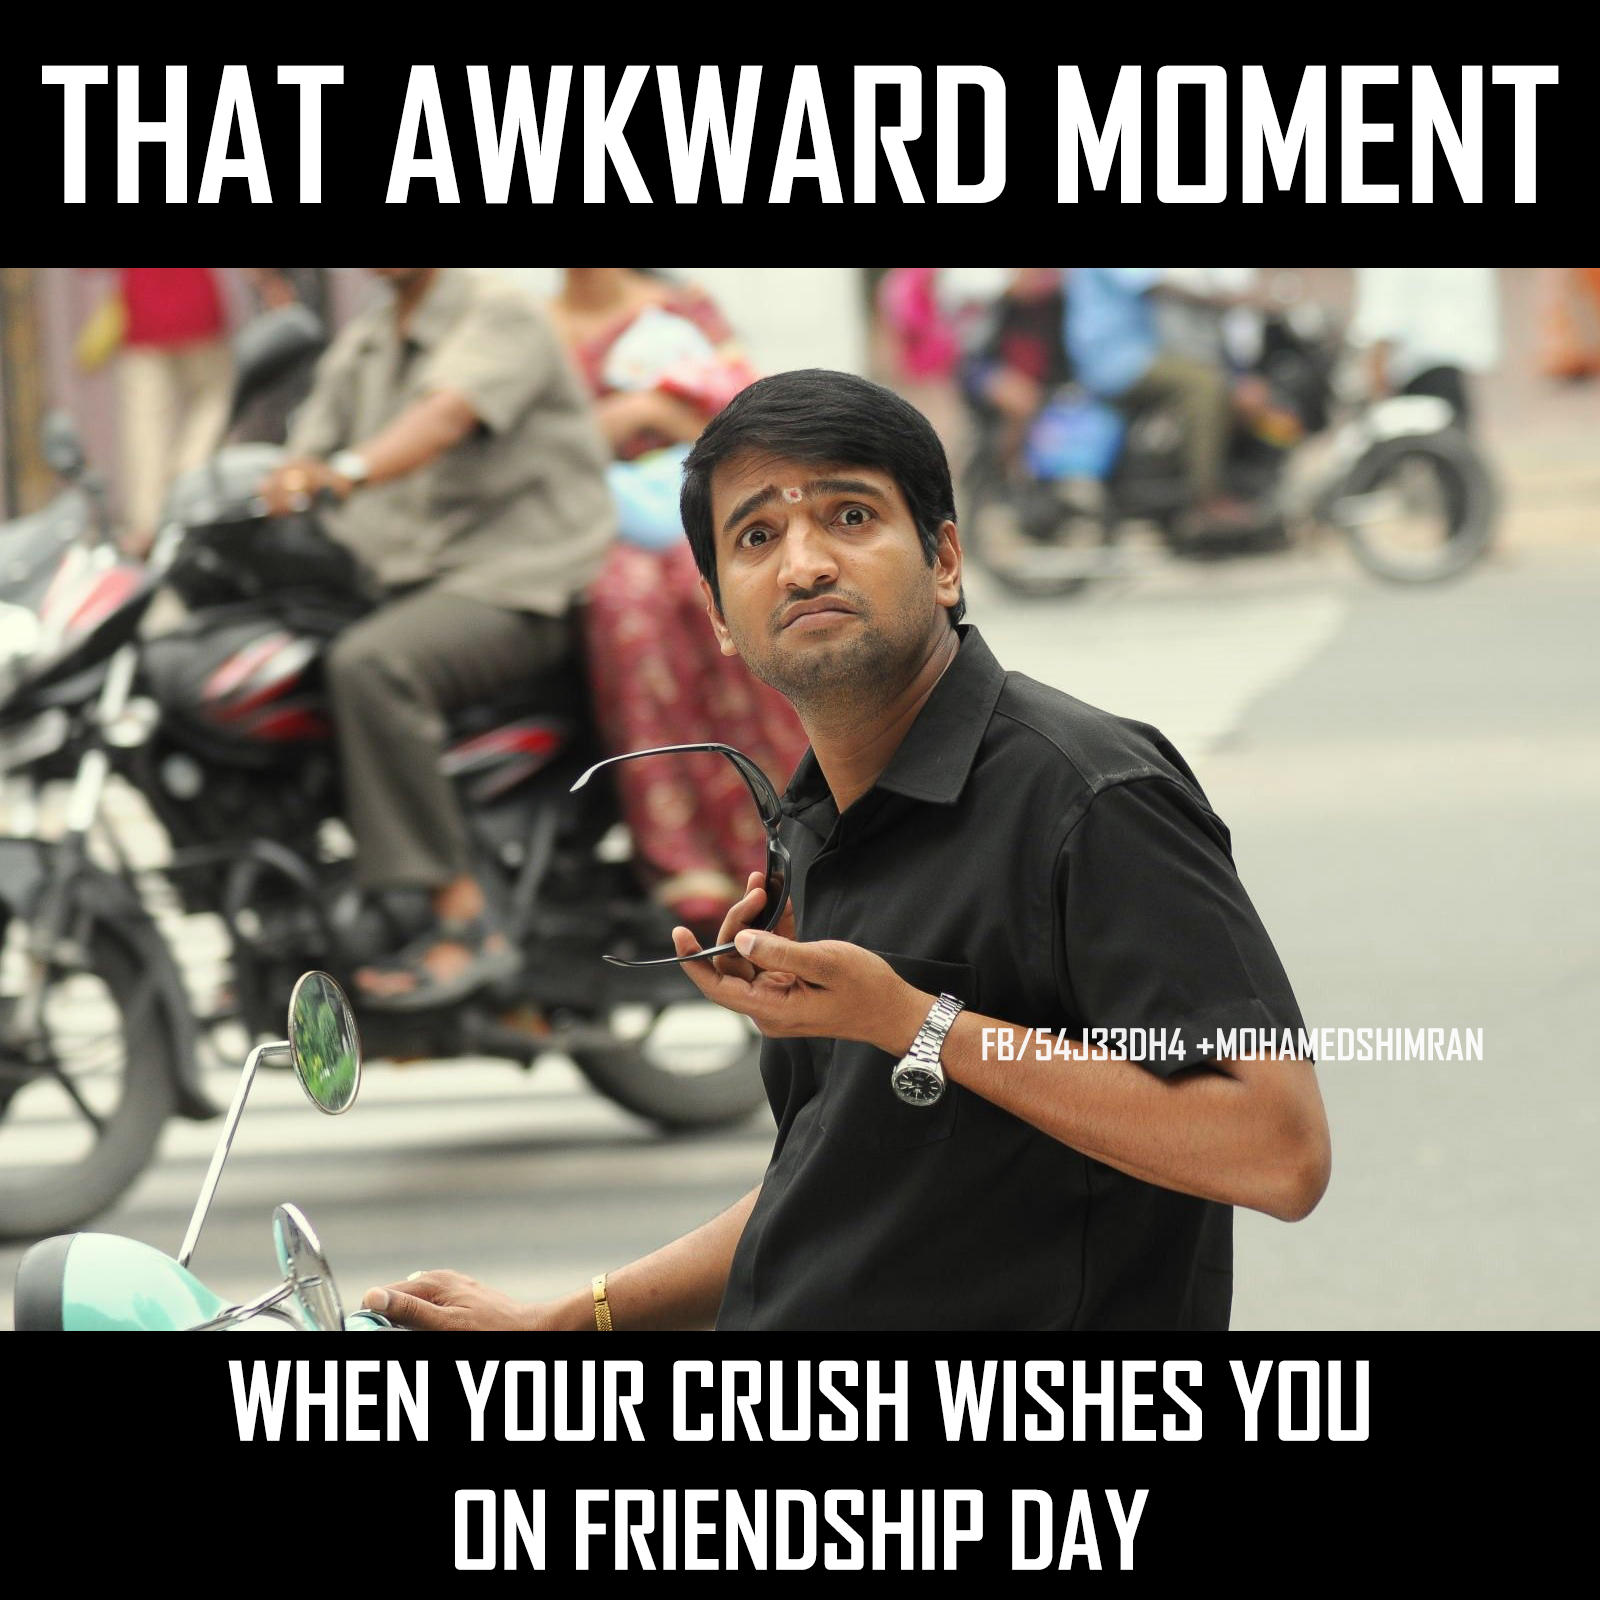 Friendship Day Memes Images 10 Funny Memes On Friendship That Will Make Your Friends Laugh Out Loud